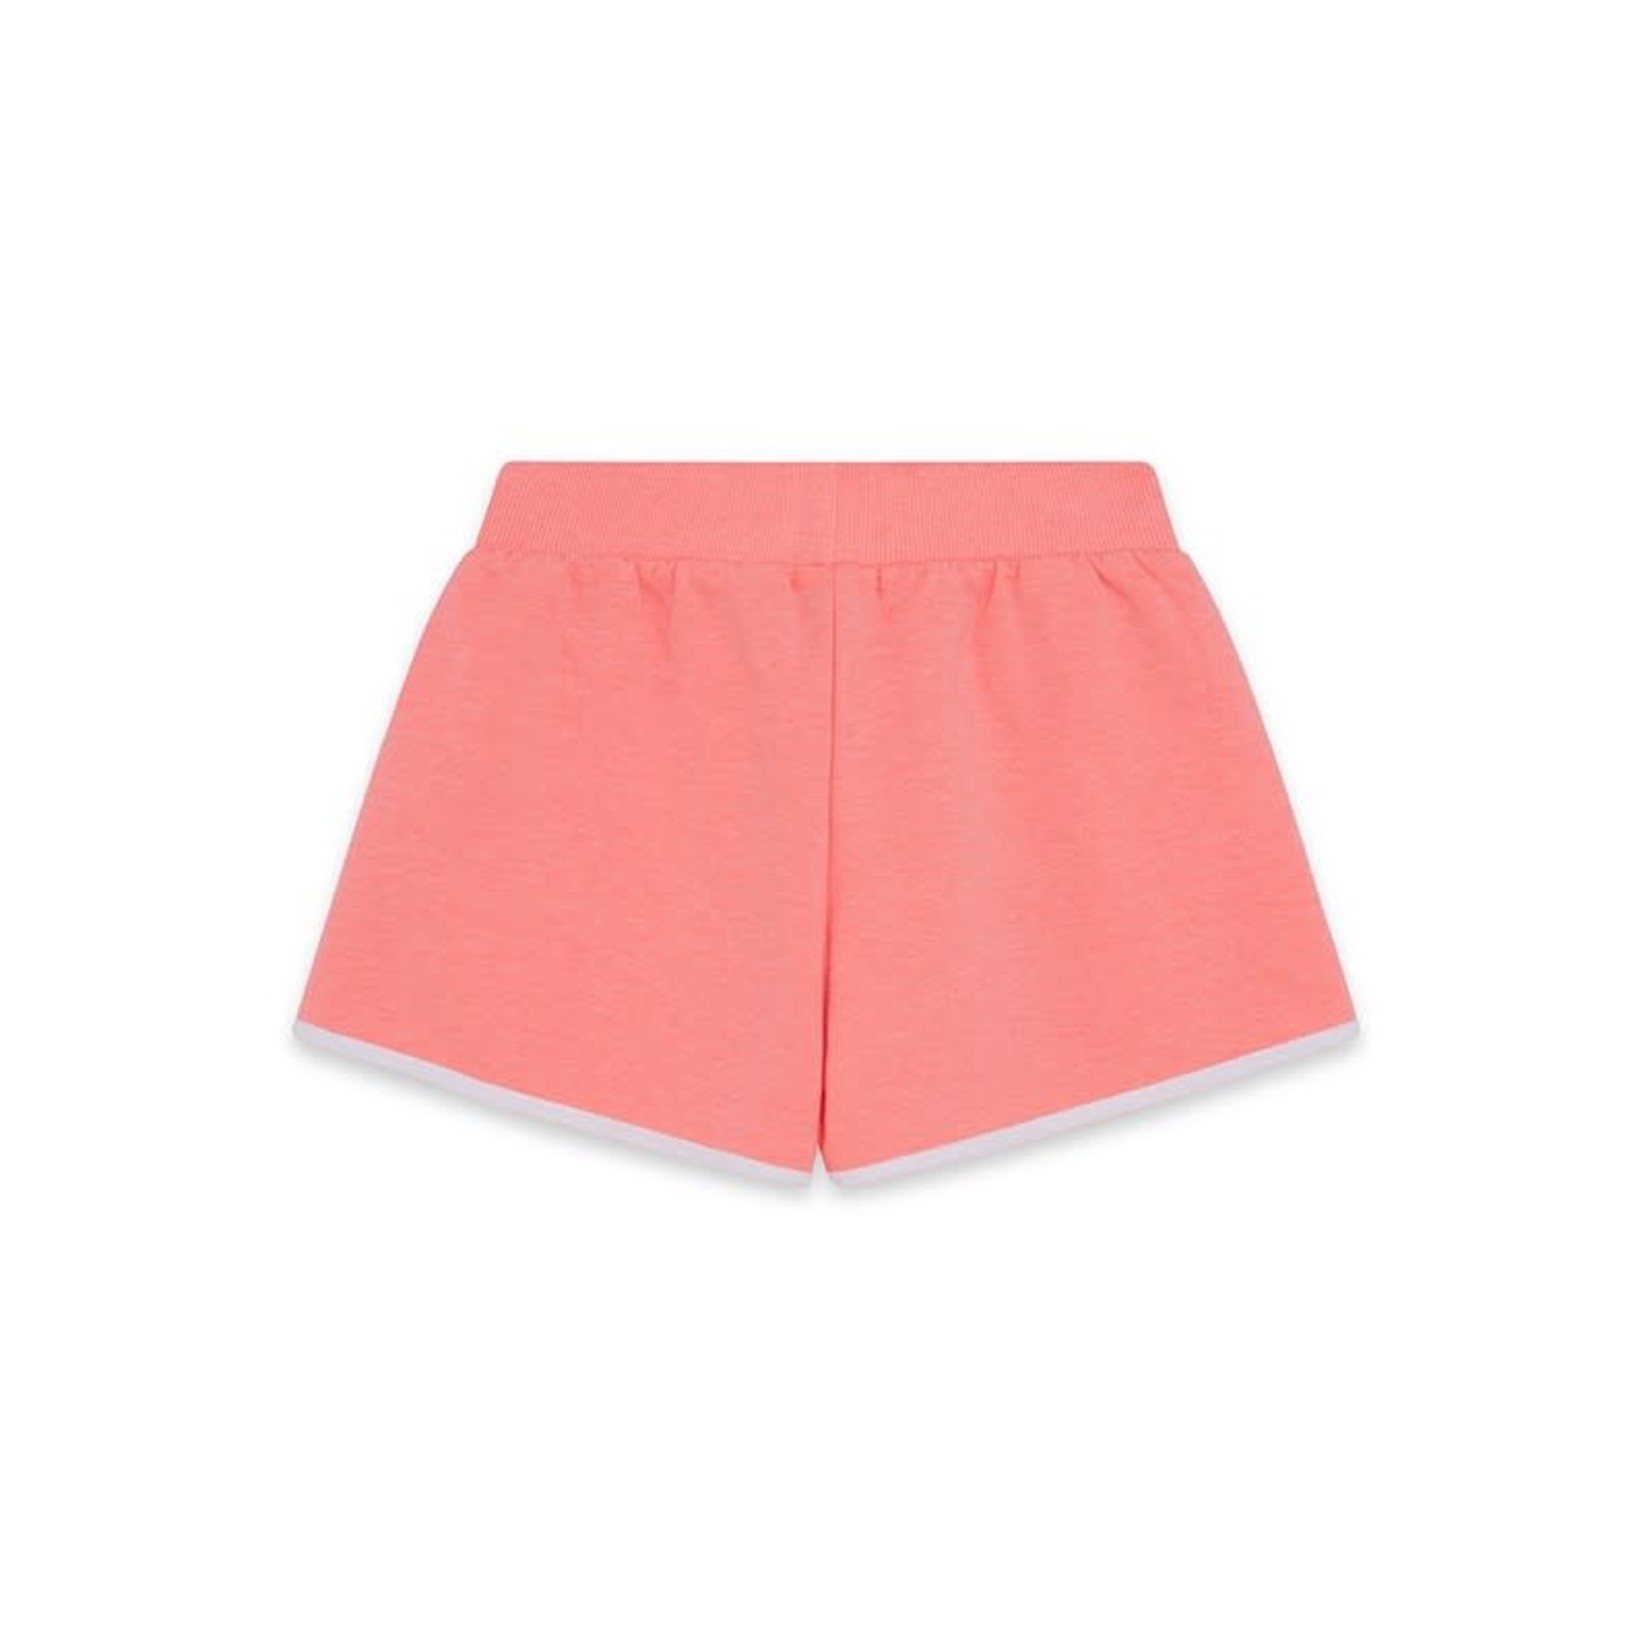 TucTuc TUC TUC - Sporty shorts 'NK Vitamin Summer' - Neon Pink/White